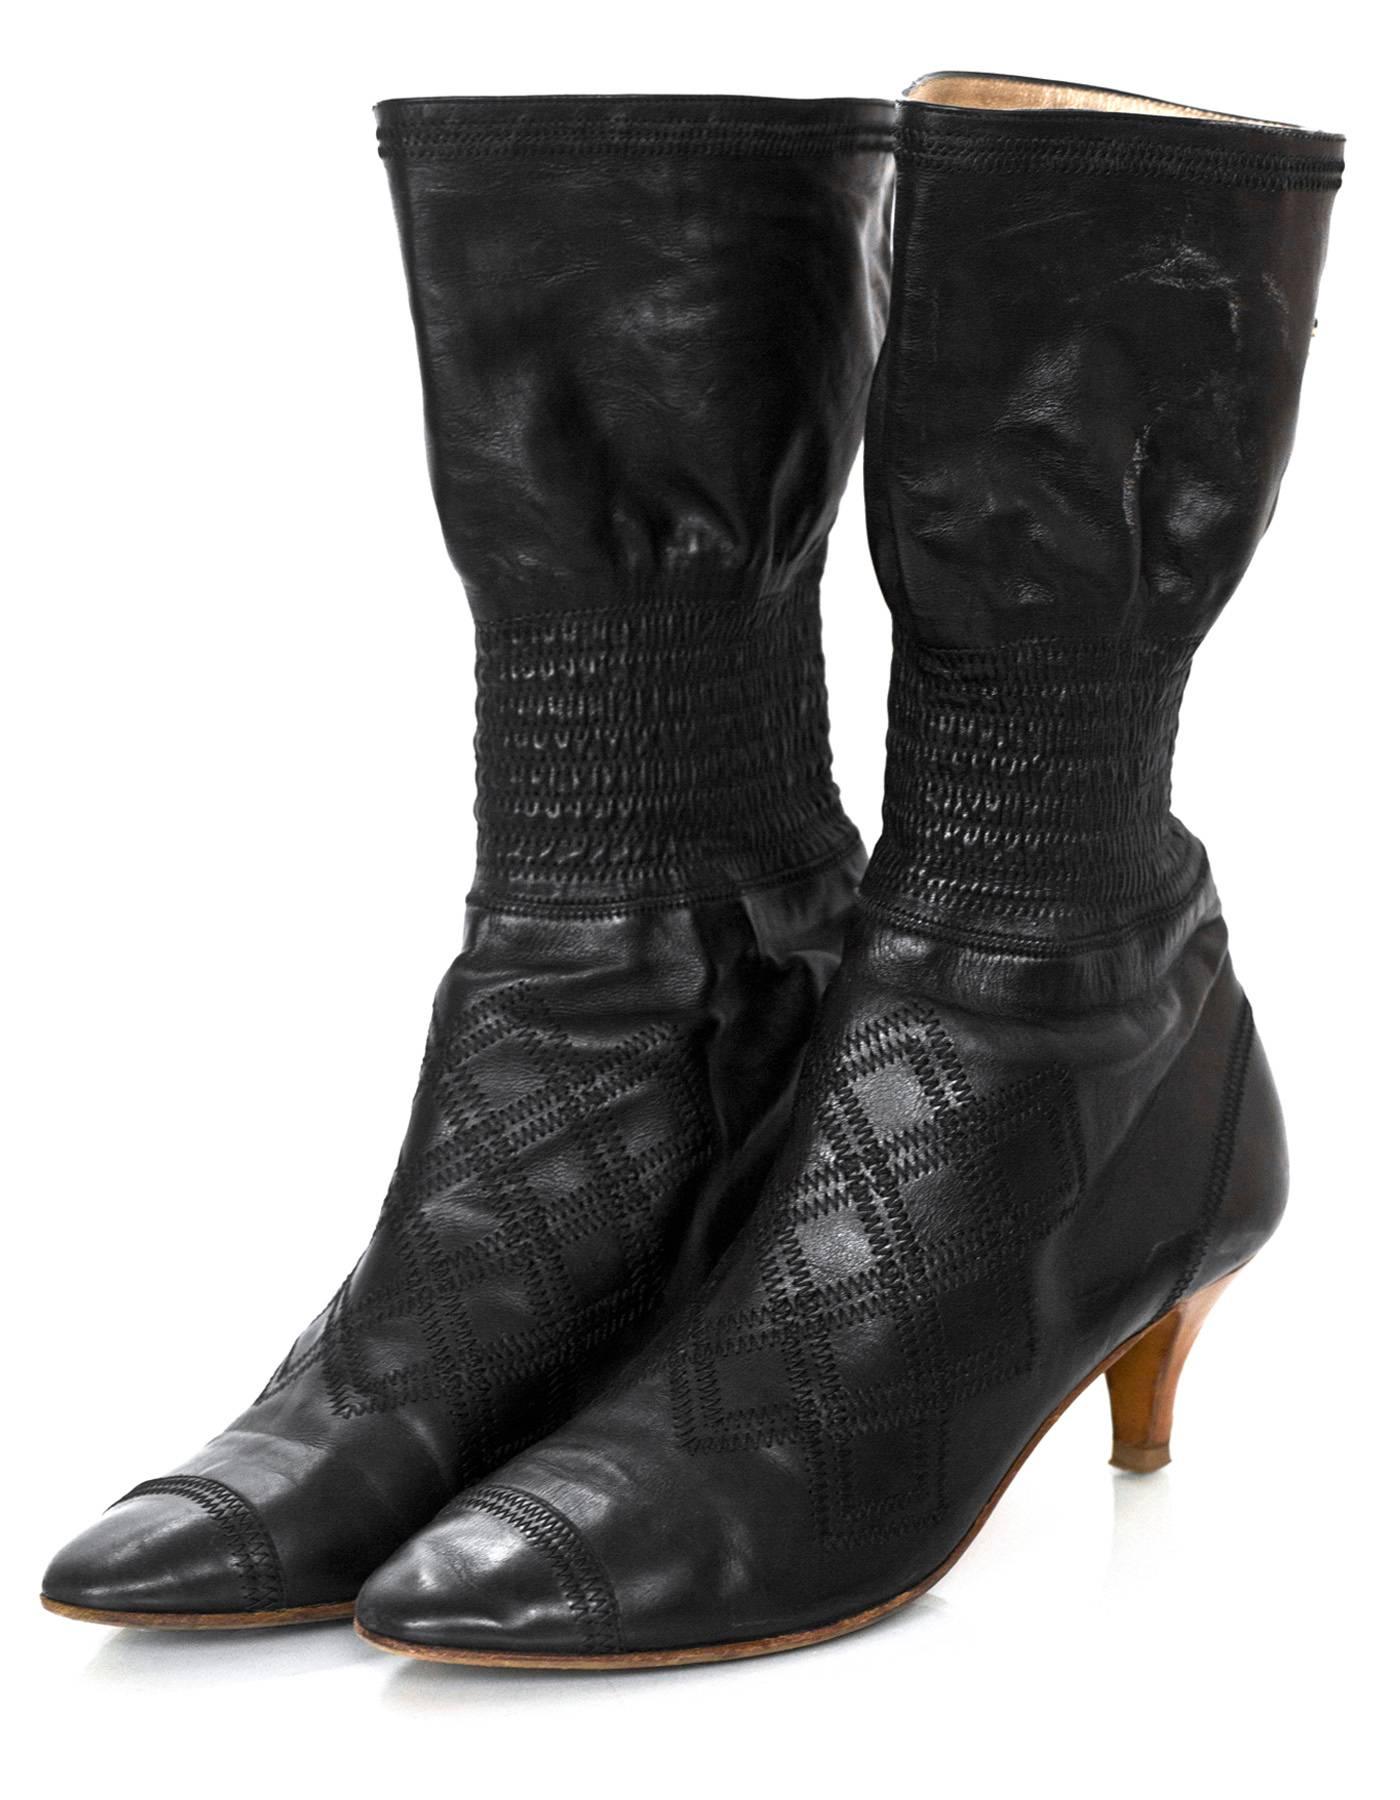 Chanel Black Quilted Stretch Boots Sz 40

Color: Black
Materials: Leather
Closure/Opening: Pull-up
Sole Stamp: CC 40
Overall Condition: Good pre-owned condition with the exception of wear and scuffing at heels, wear at outsoles, scuffing at